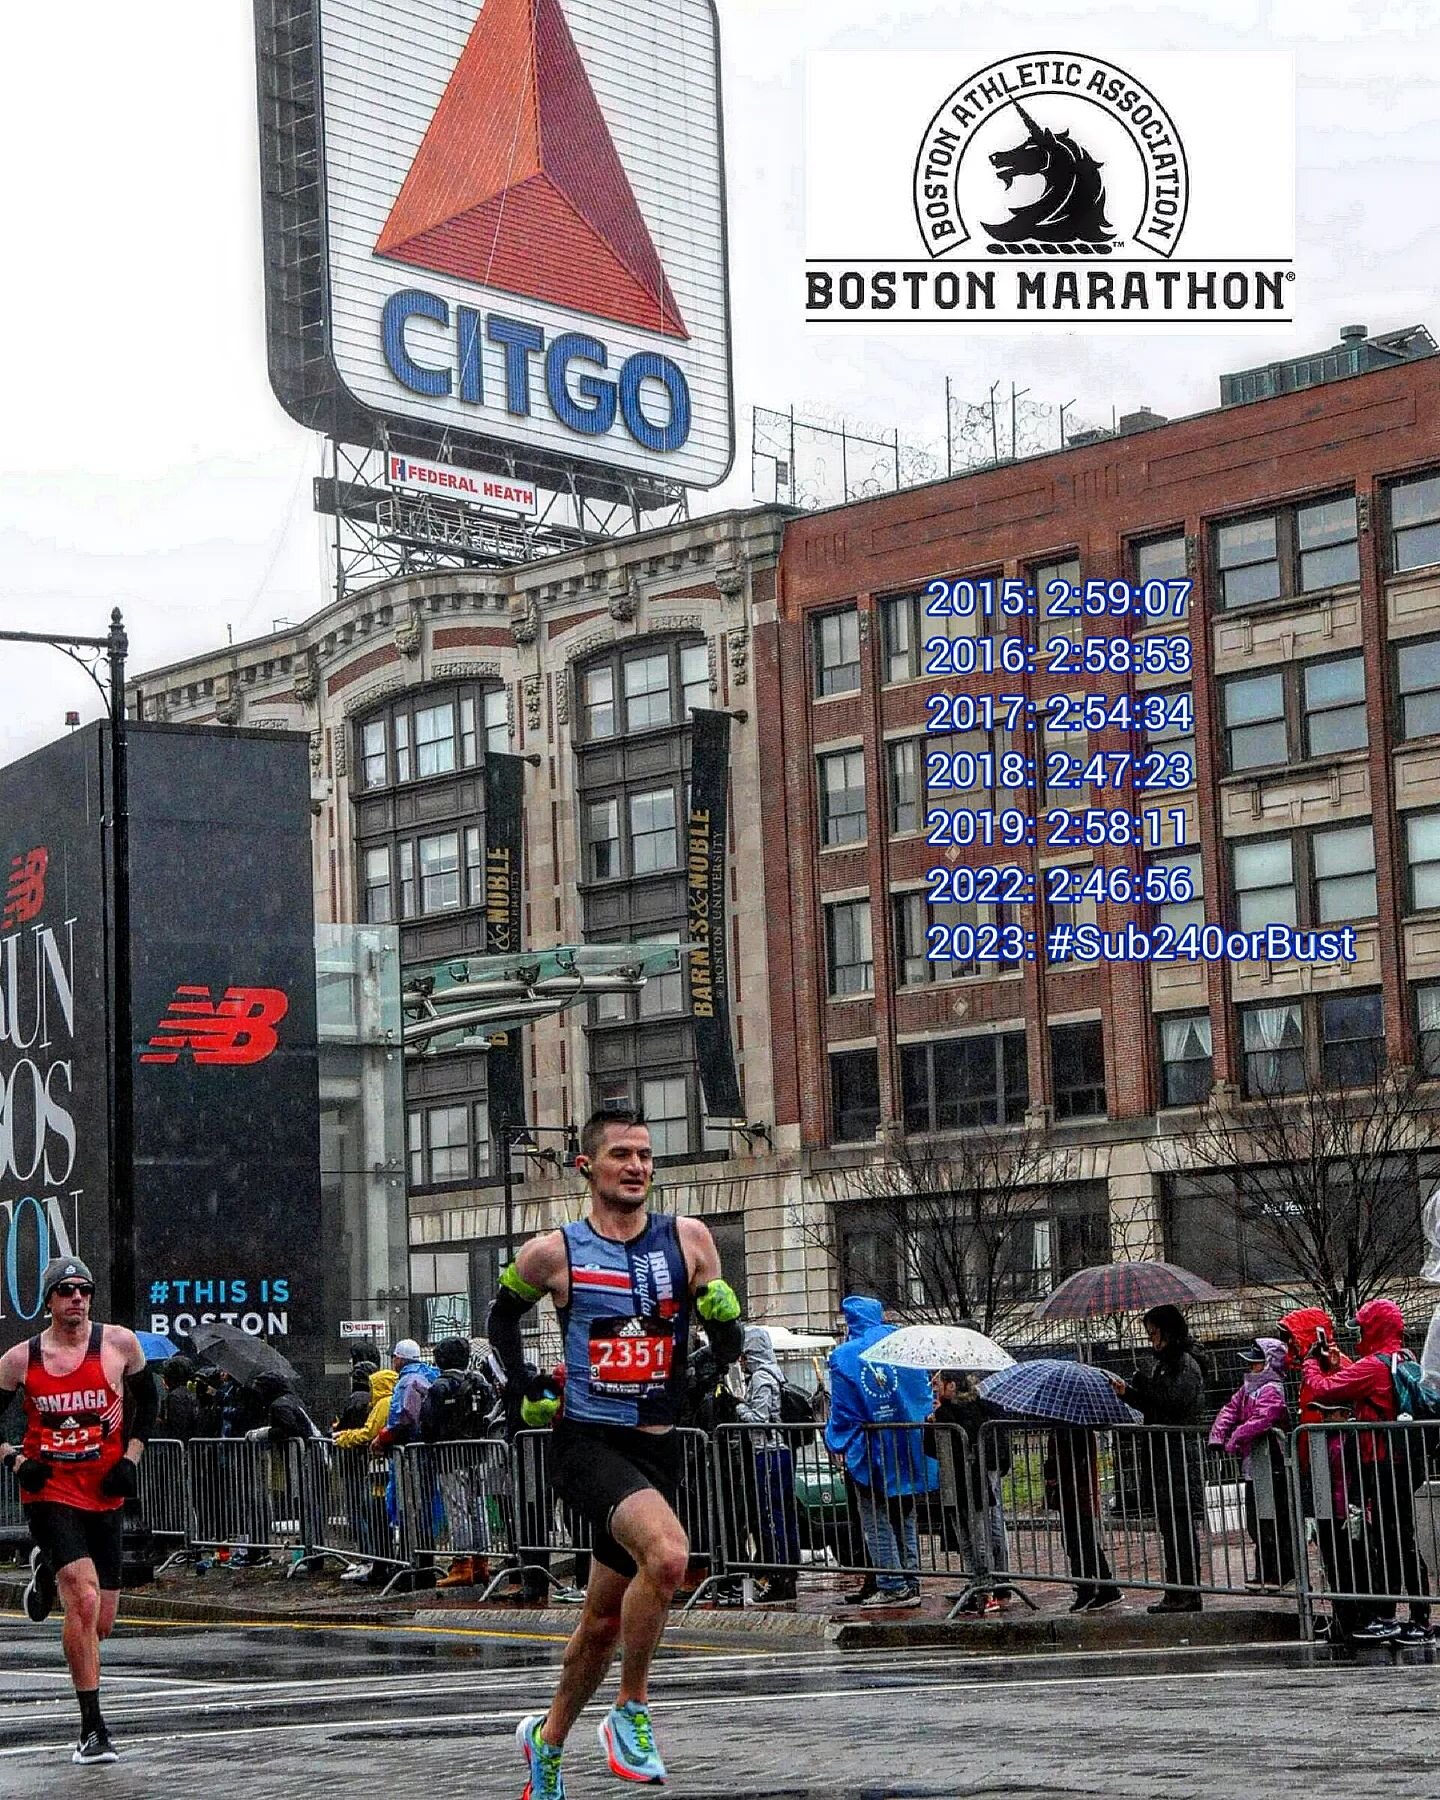 It's #BostonMarathon month! #Flashback to my favorite #marathon ever, the #monsoon year of 2018. Probably the only time I ever showed up ready to break 2:40, but sometimes you just have to take what #MotherNature gives.
..
Hoping for better weather t